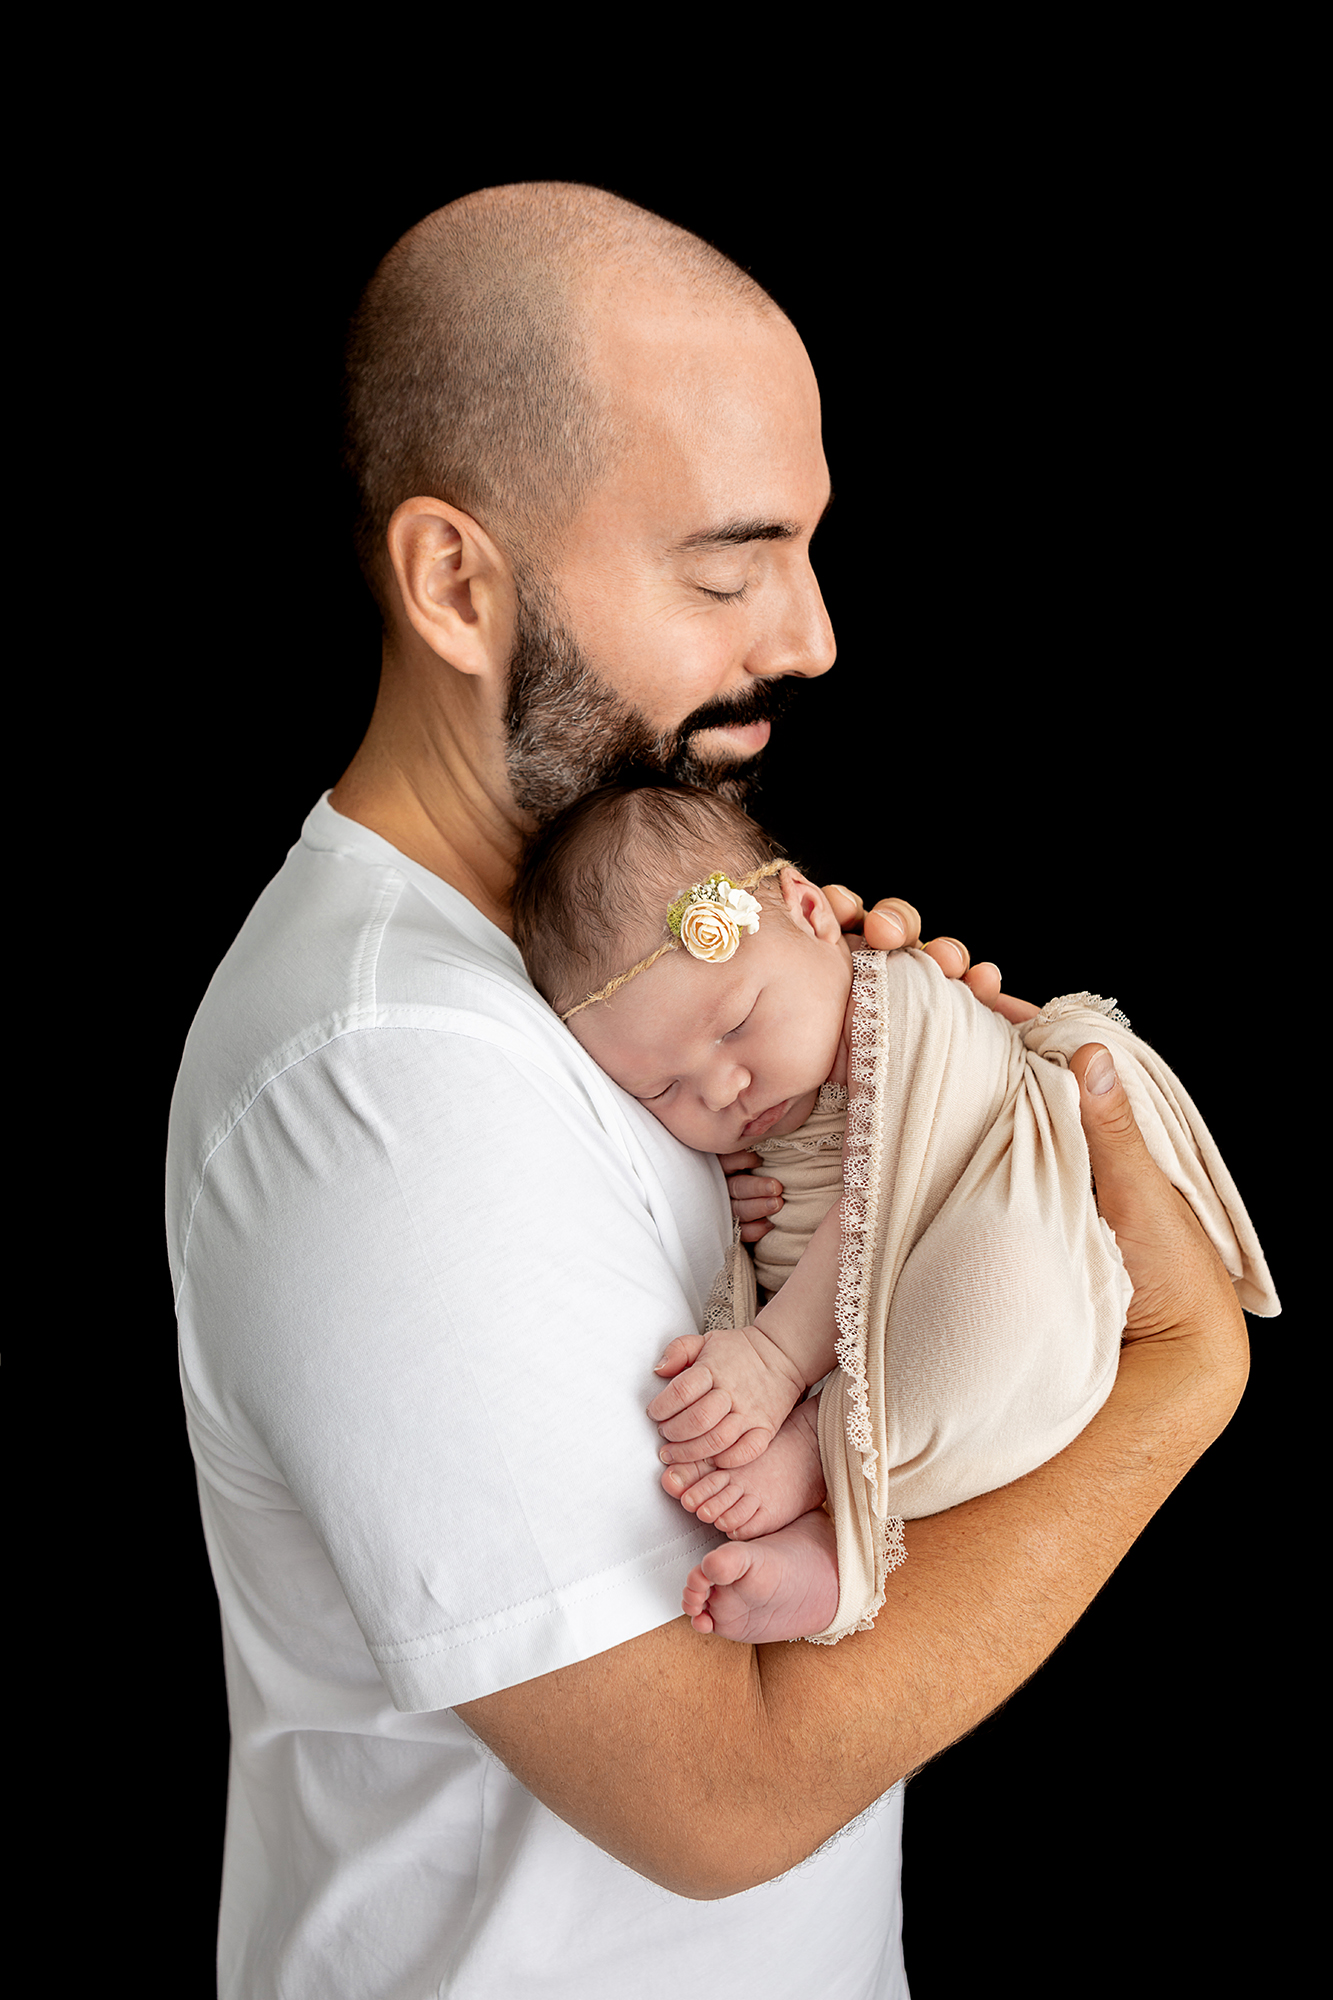 father with a salt and pepper beard wearing a white tee closing his eyes and smiling as he holds his newborn daughter who is wearing a twine and rosette headband and wrapped in an off-white stretch wrap with lace trim, the image is contrasted by a black background